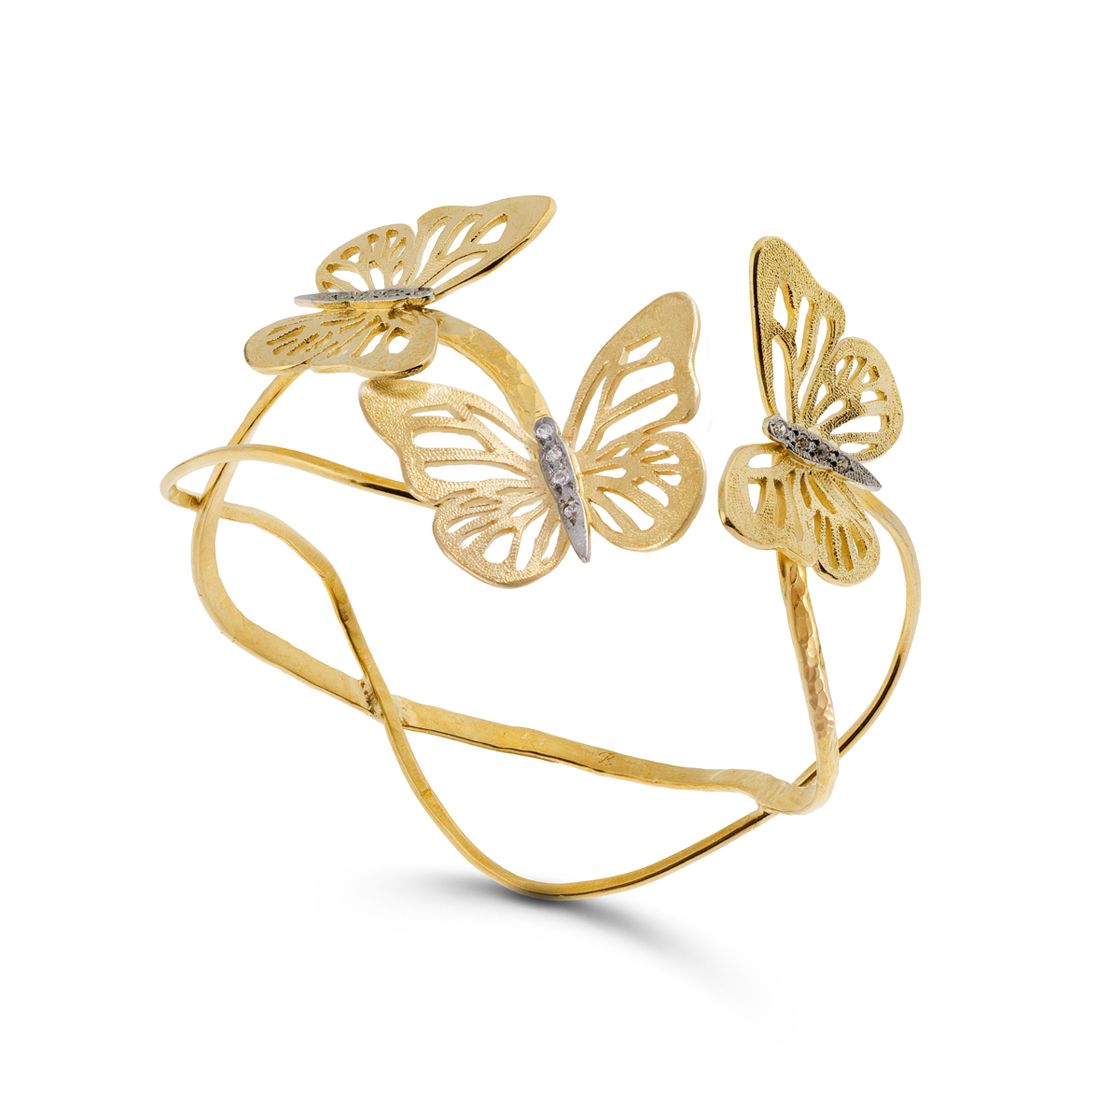 Playful butterflies bookend this gold wrap bracelet set with zircon stones.